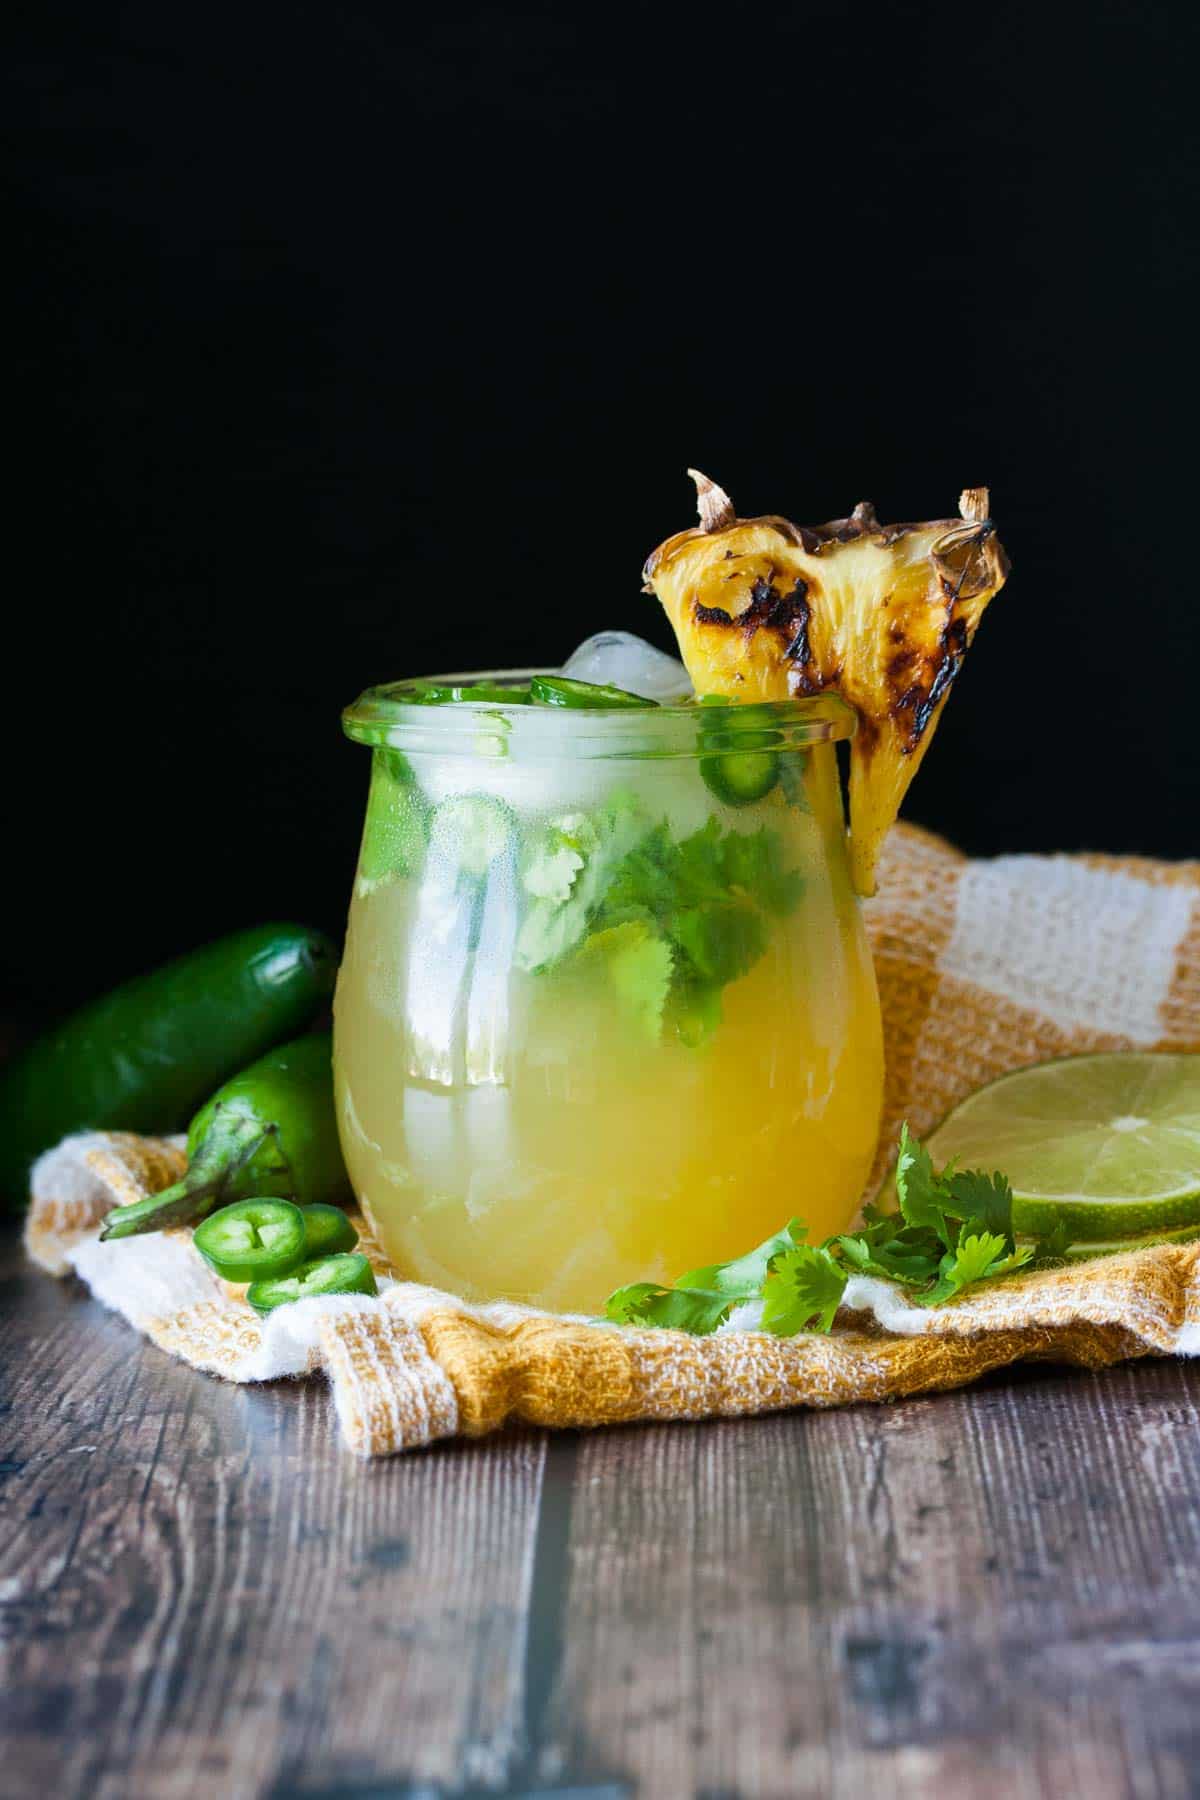 Glass with a pineapple jalapeno margarita inside